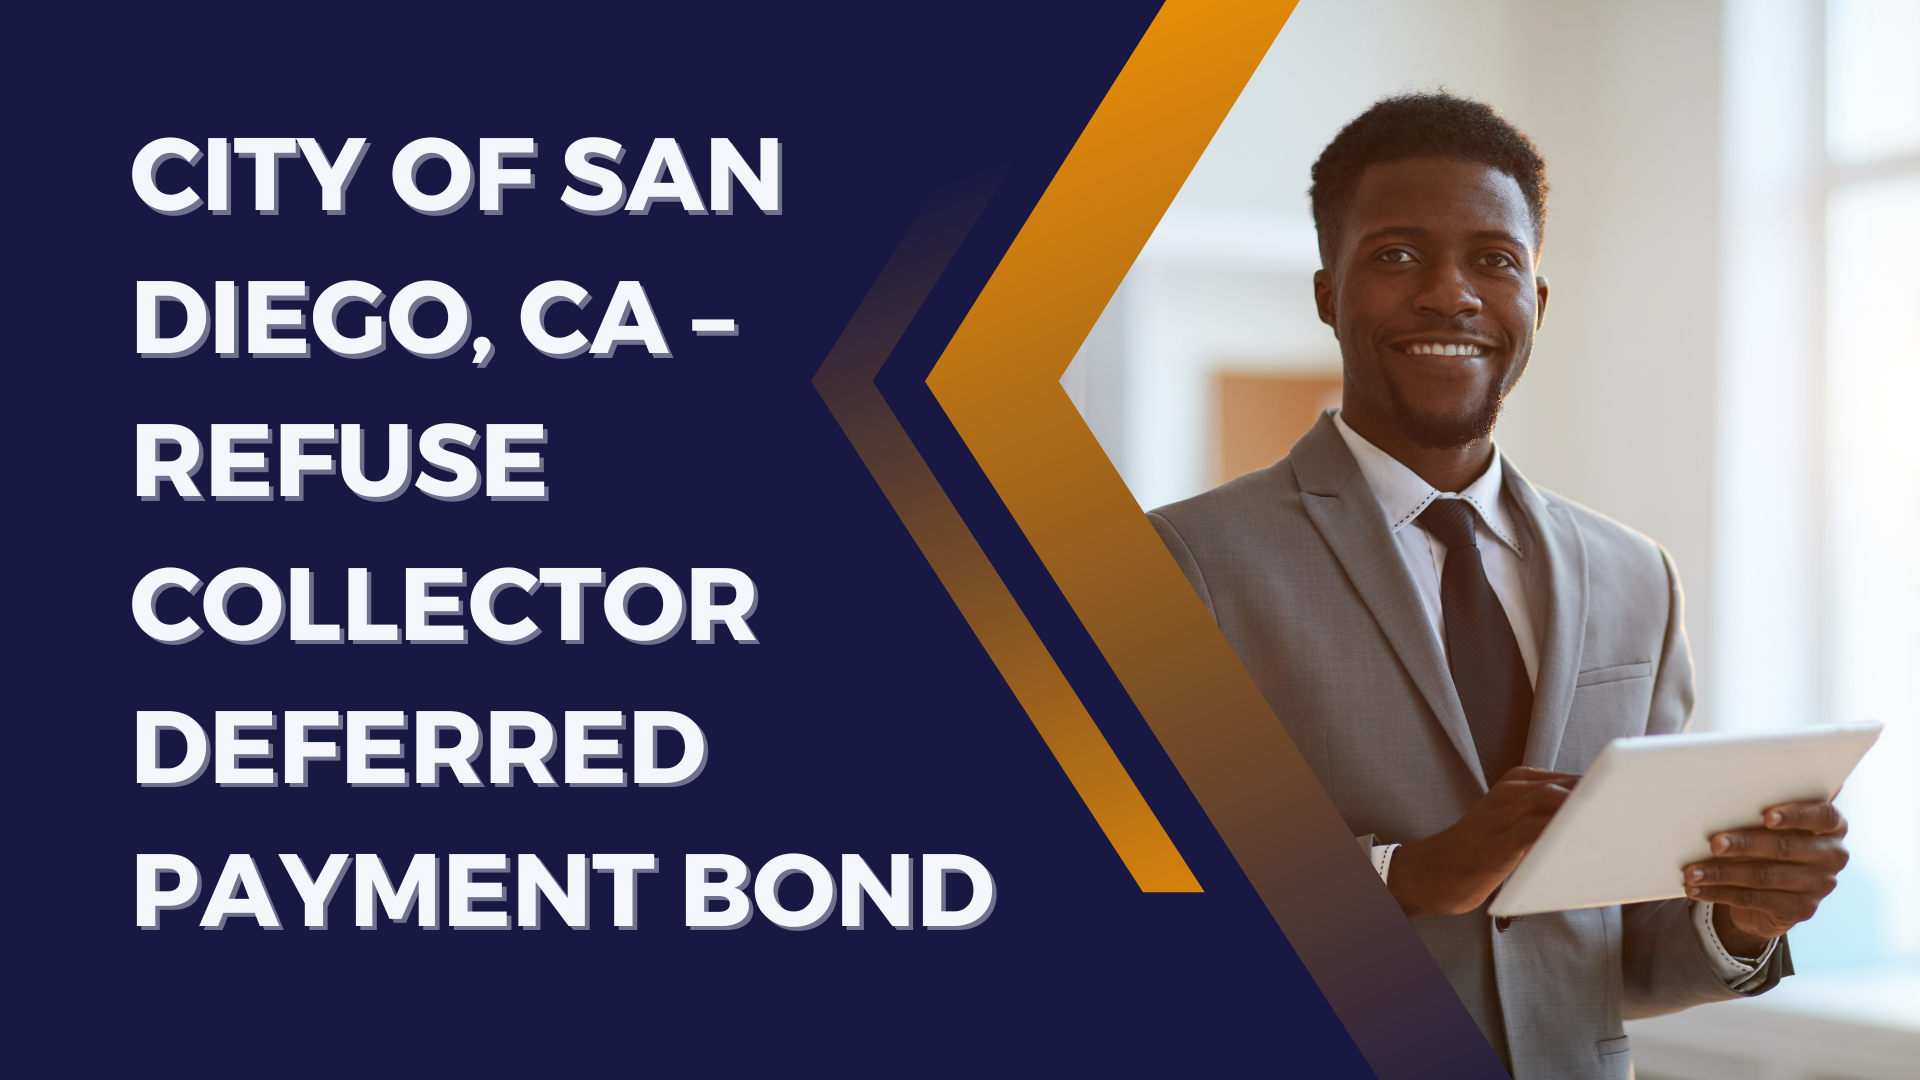 Surety Bond - City of San Diego, CA – Refuse Collector Deferred Payment Bond